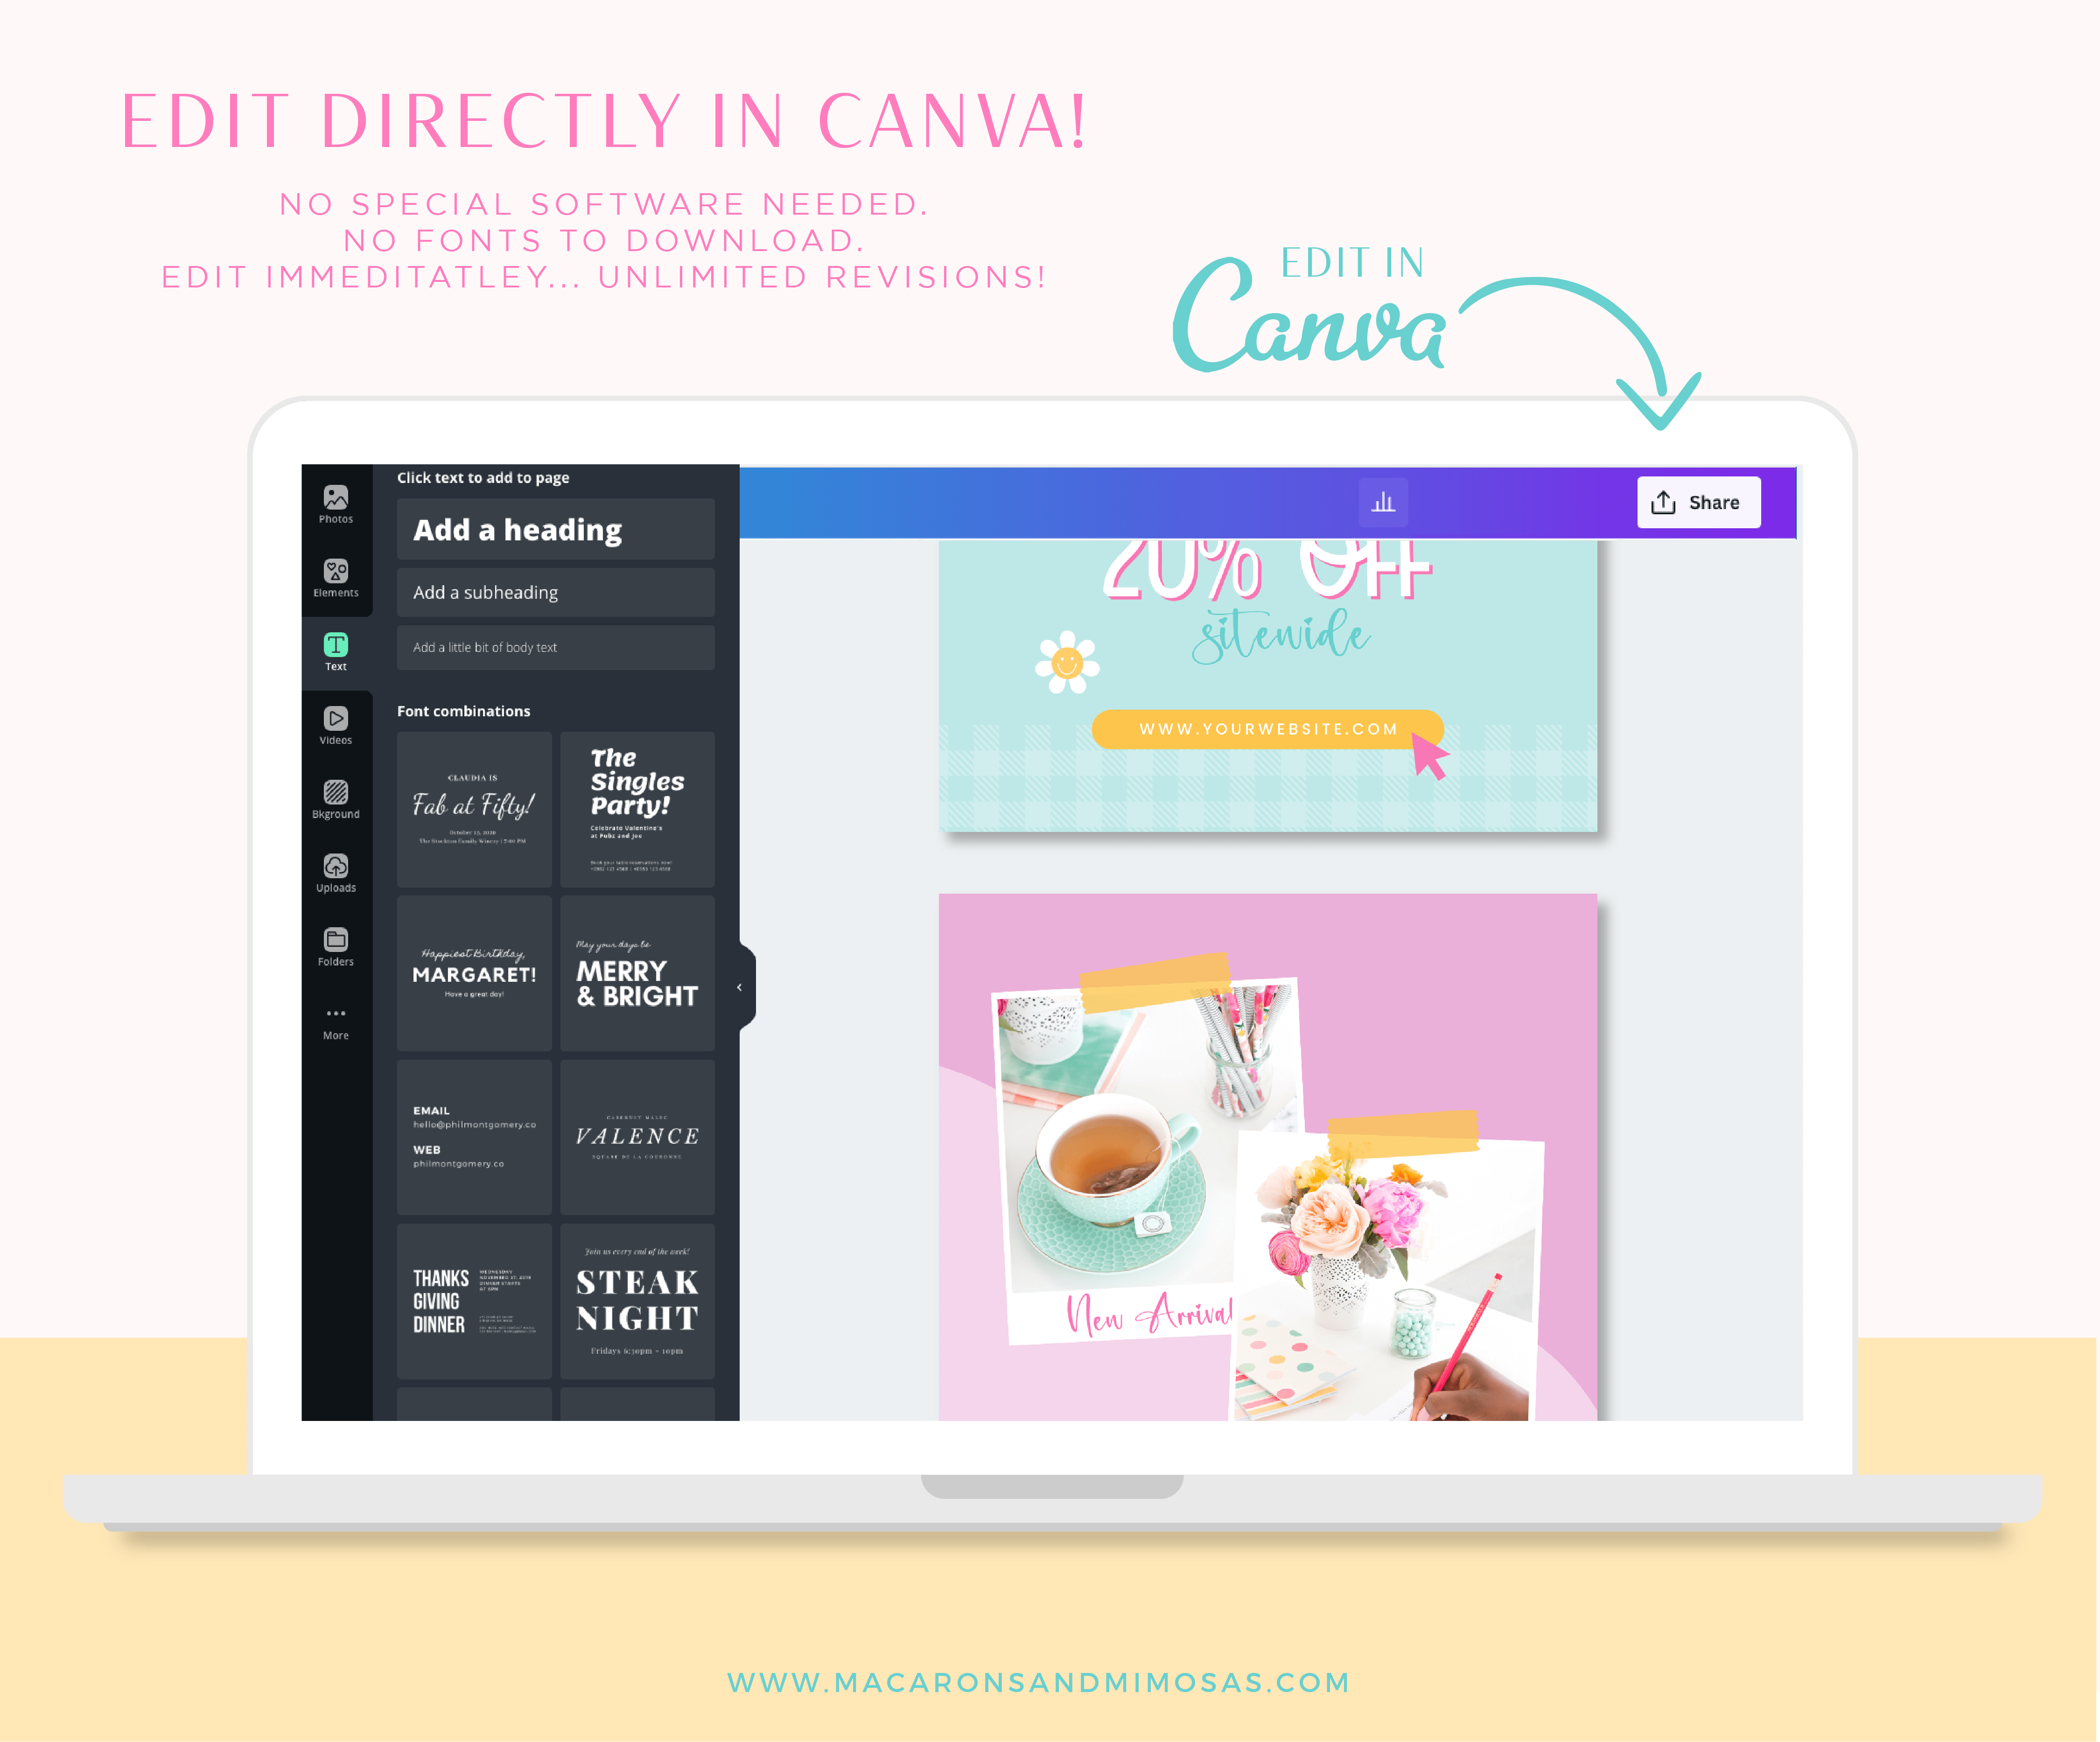 Bright Rainbow Instagram Templates for Canva, Fun Colorful Retro Instagram for Stories and Posts to engage with your audience on social media.